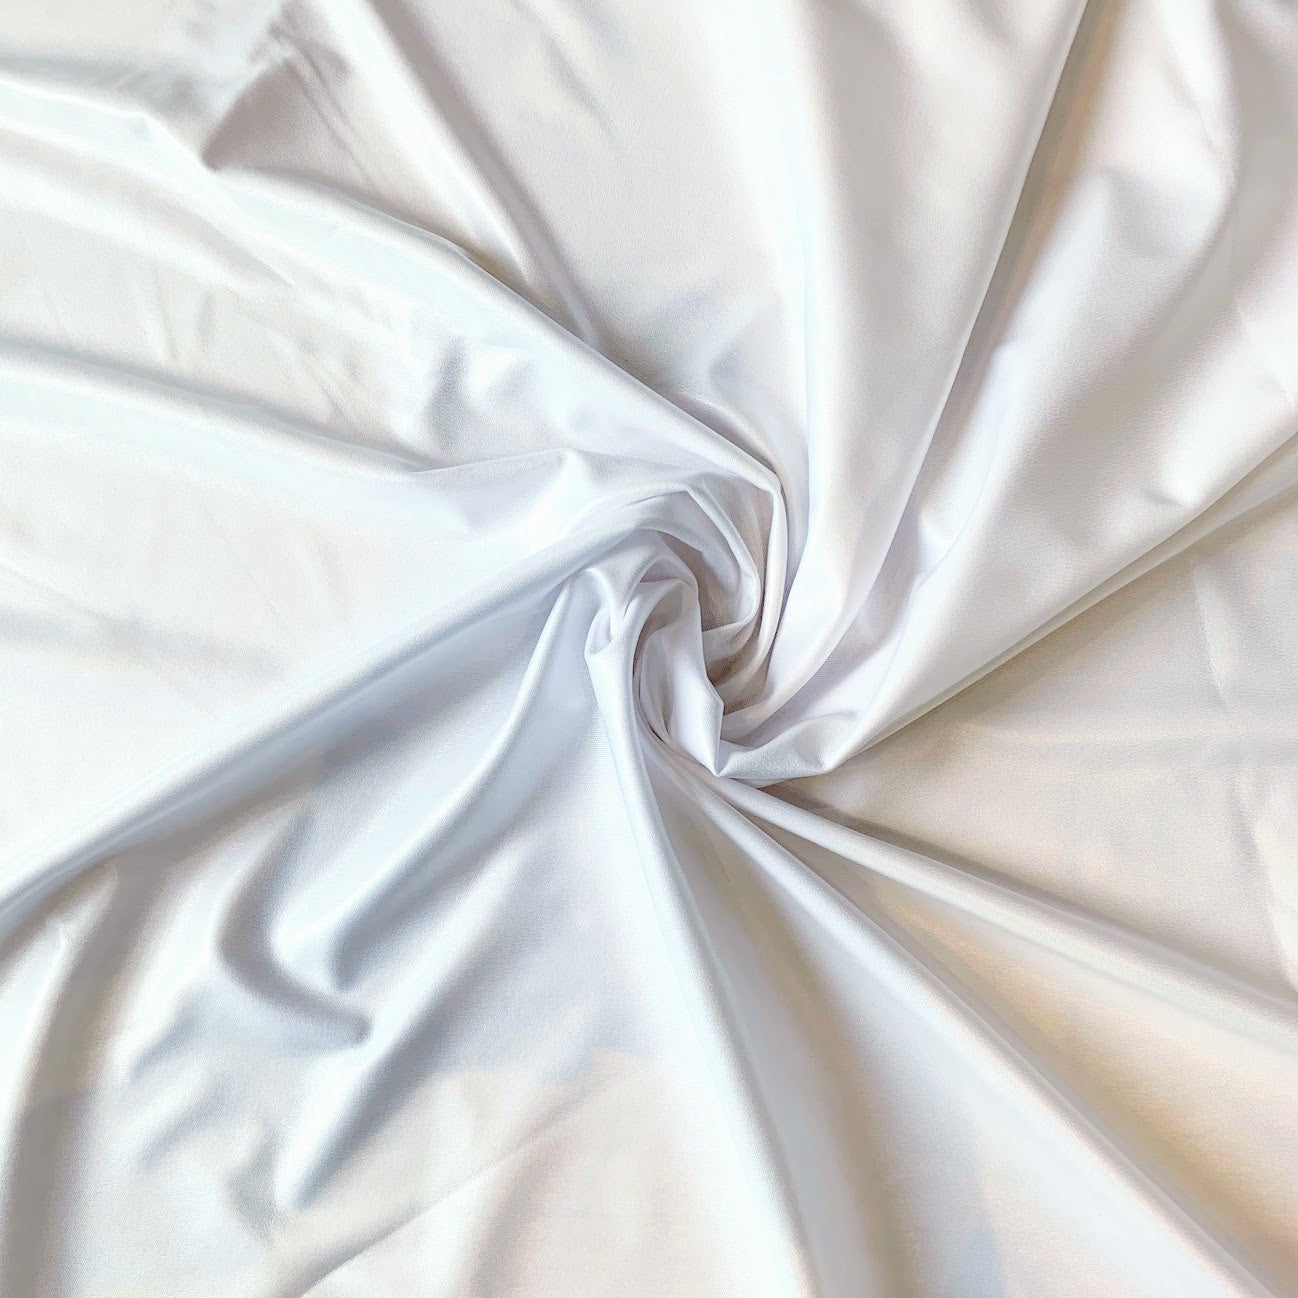 2 mil White Polyester PUL Fabric, $4.99/yd, 100 Yards – Nature's